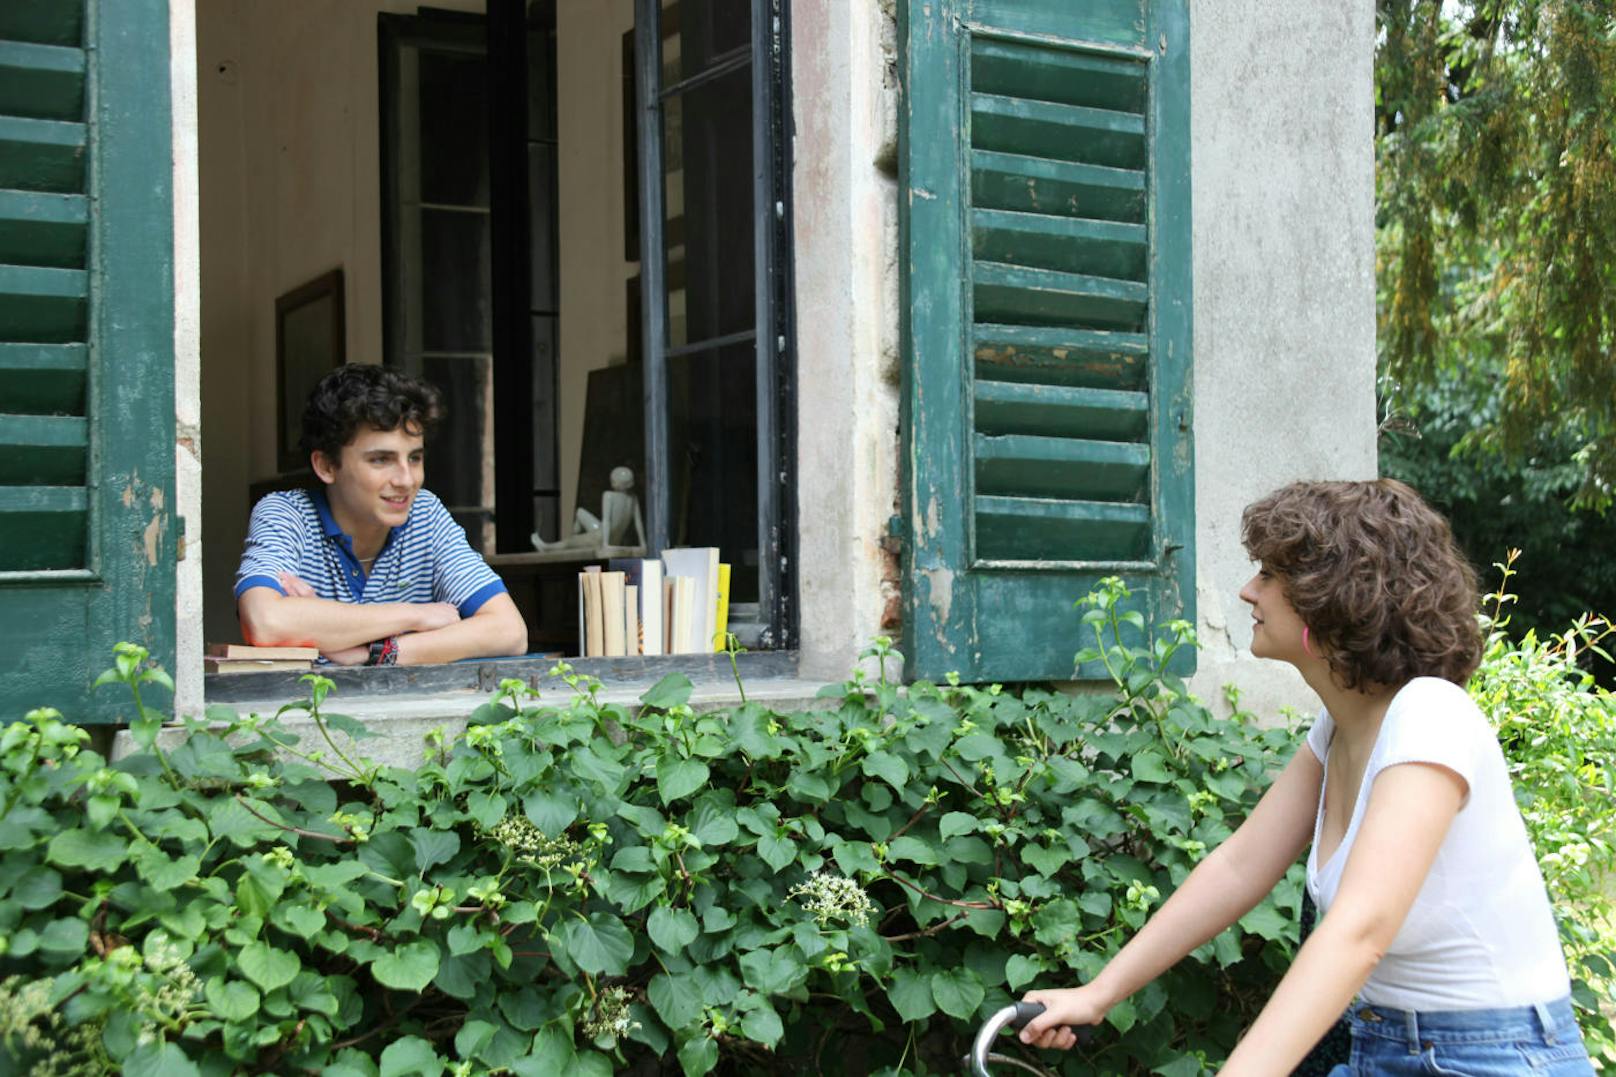 Elio (Timothée Chalamet) und Marzia (Esther Garrel) in "Call Me By Your Name"